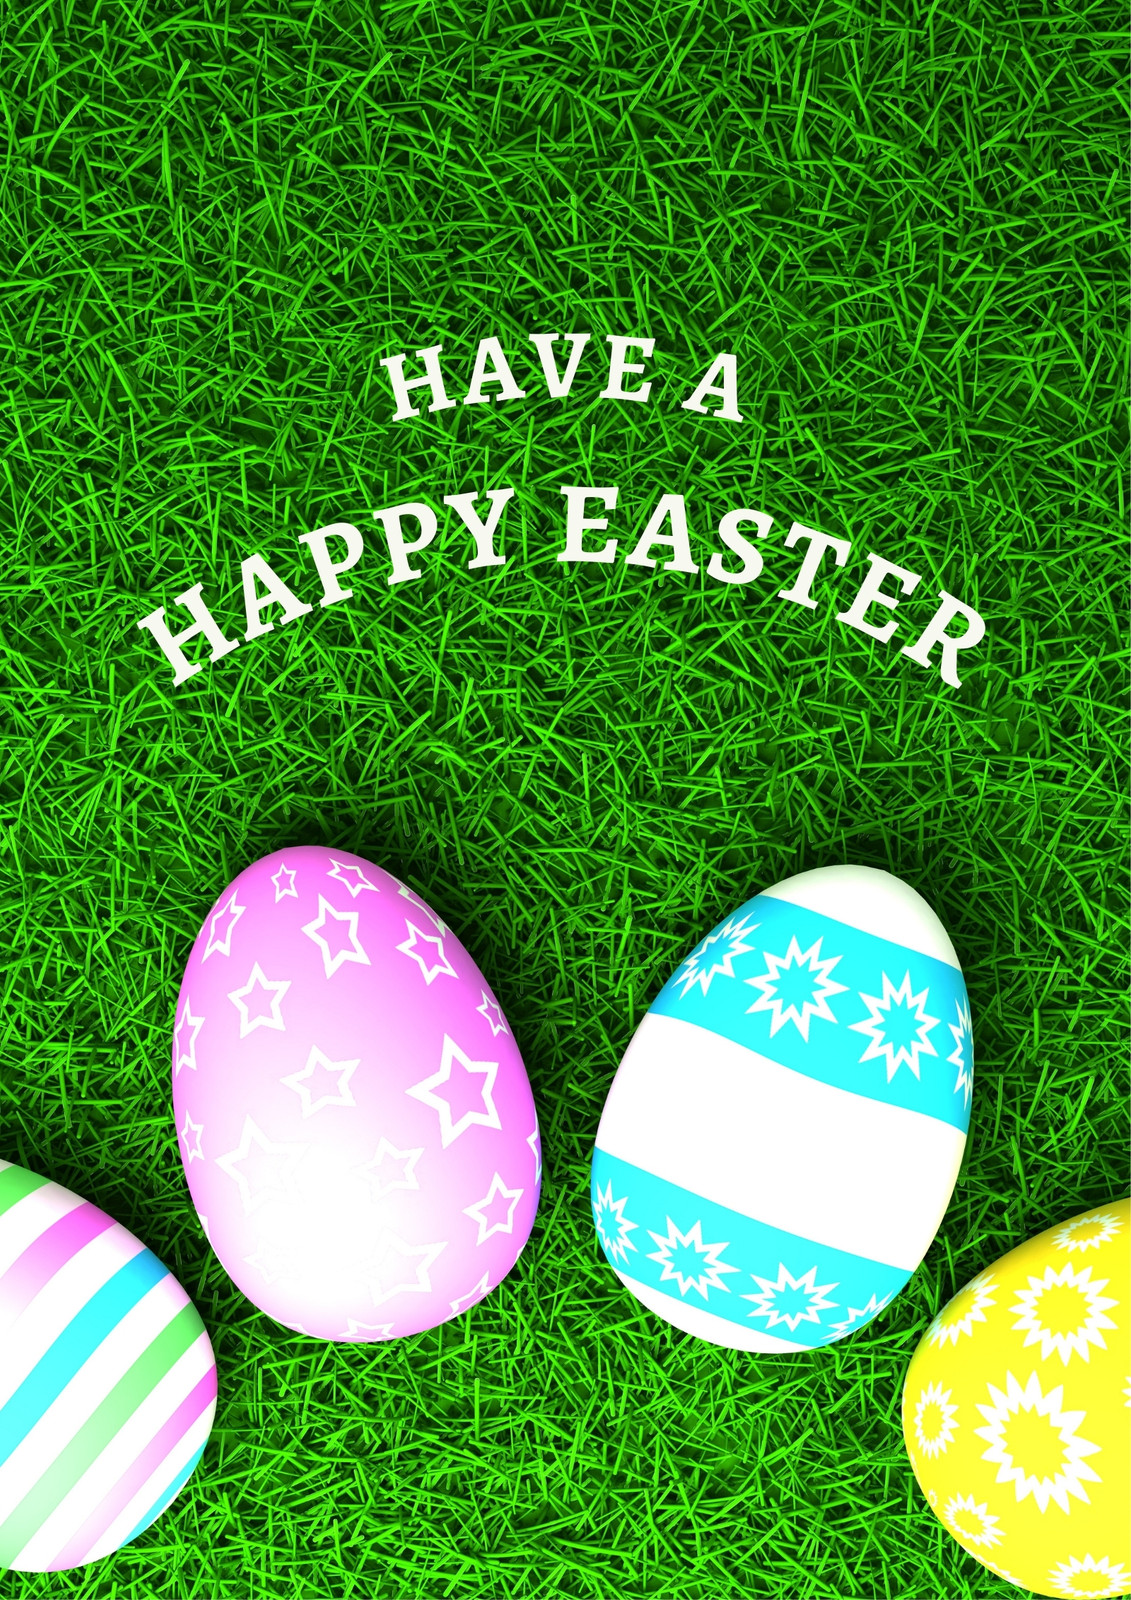 Happy Easter Poster Printable